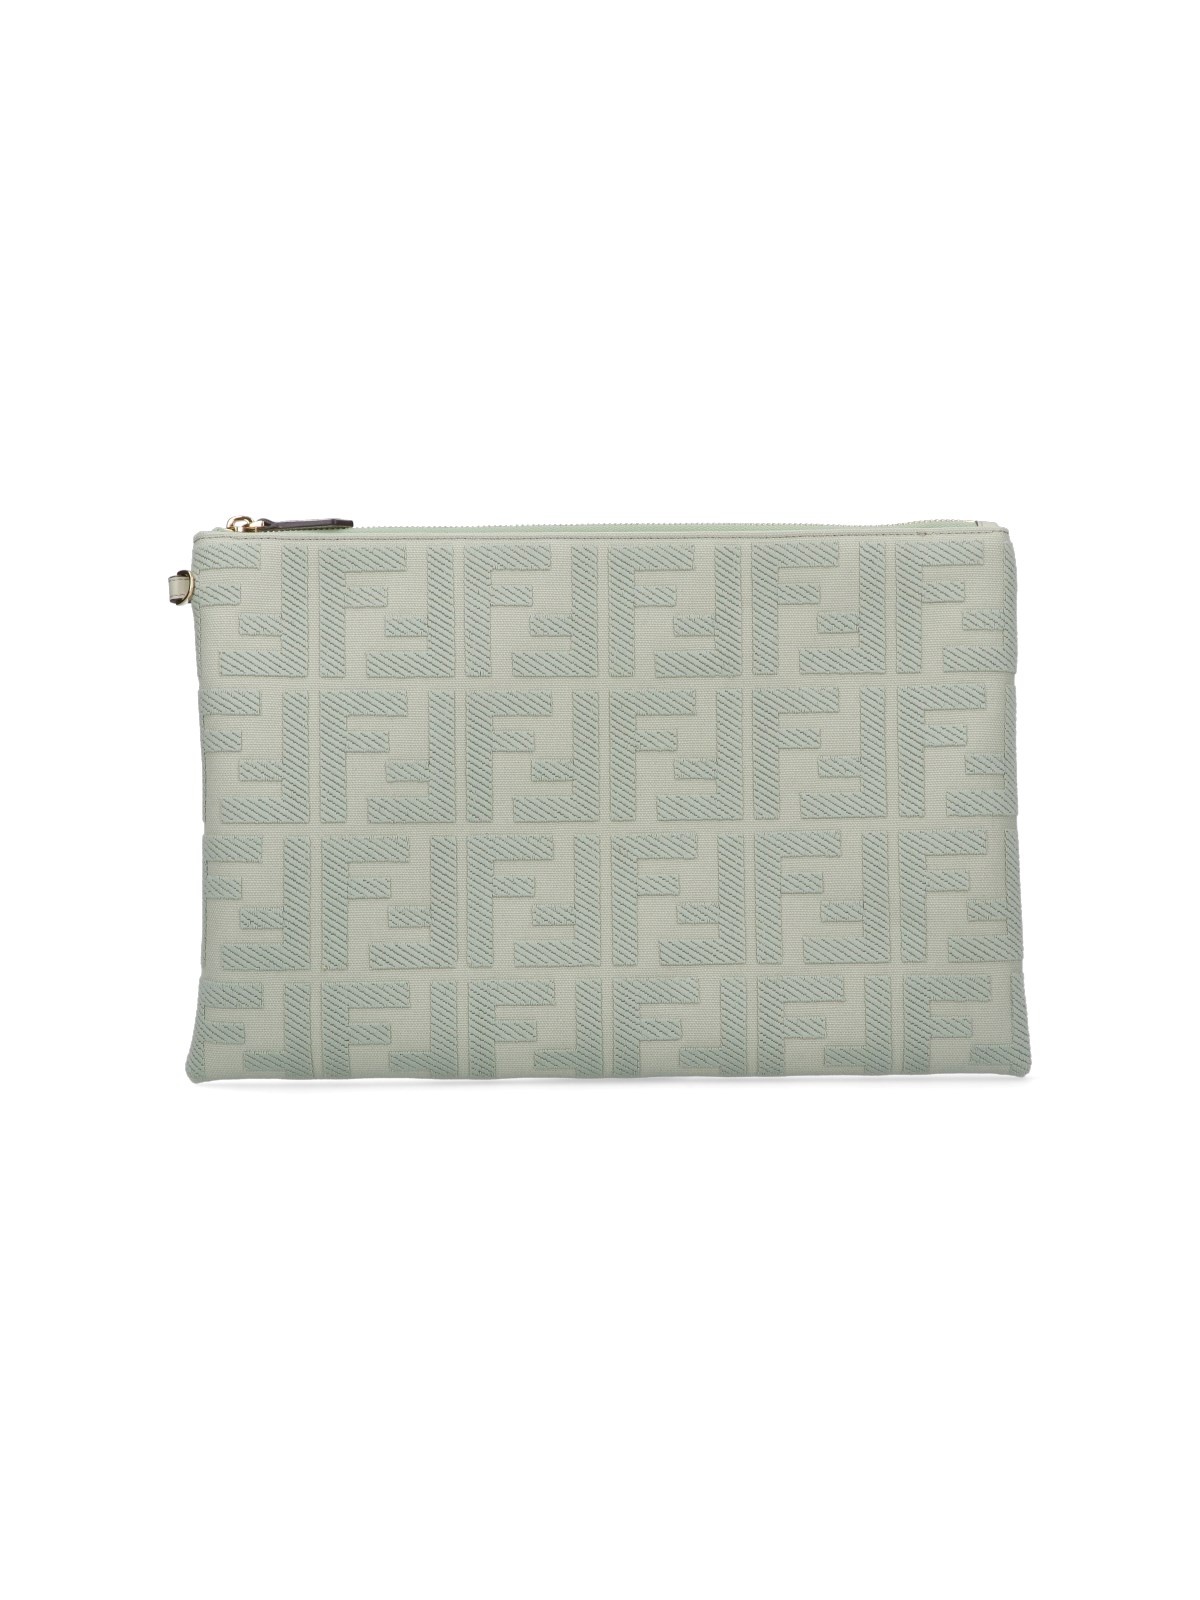 'FF' LARGE FLAT POUCH - 1